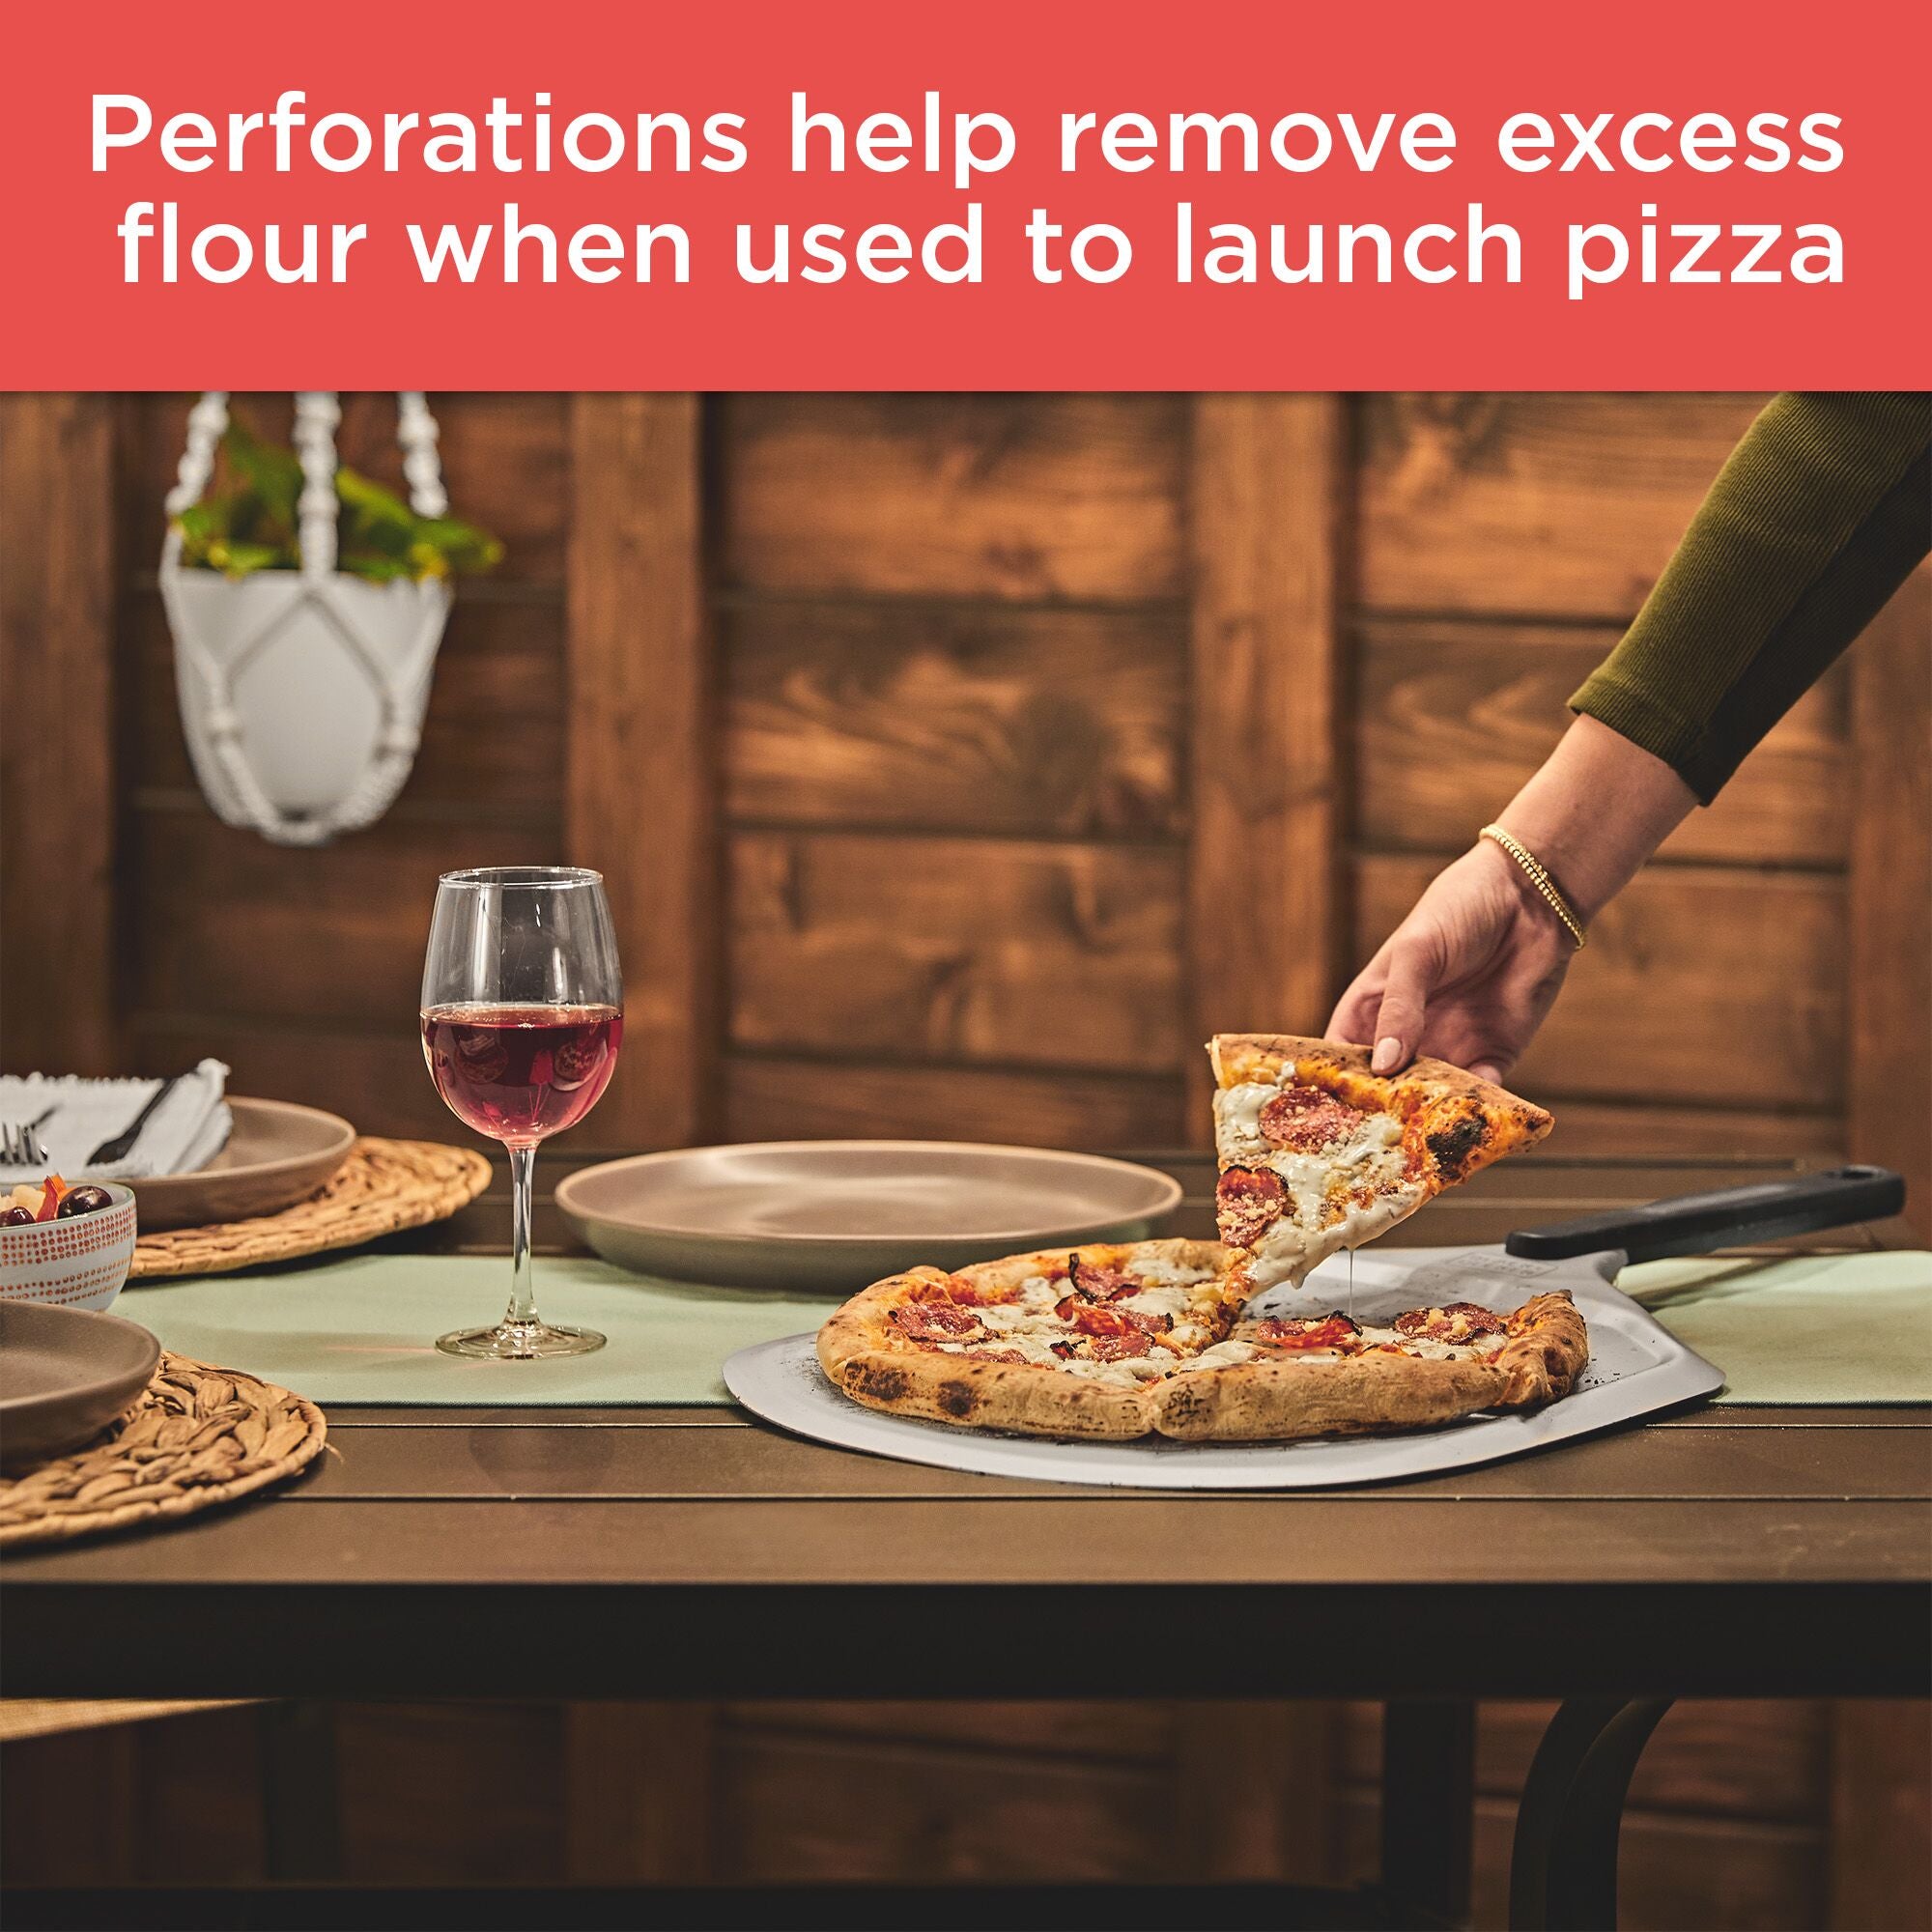 Perforations help remove excess flour when used to launch